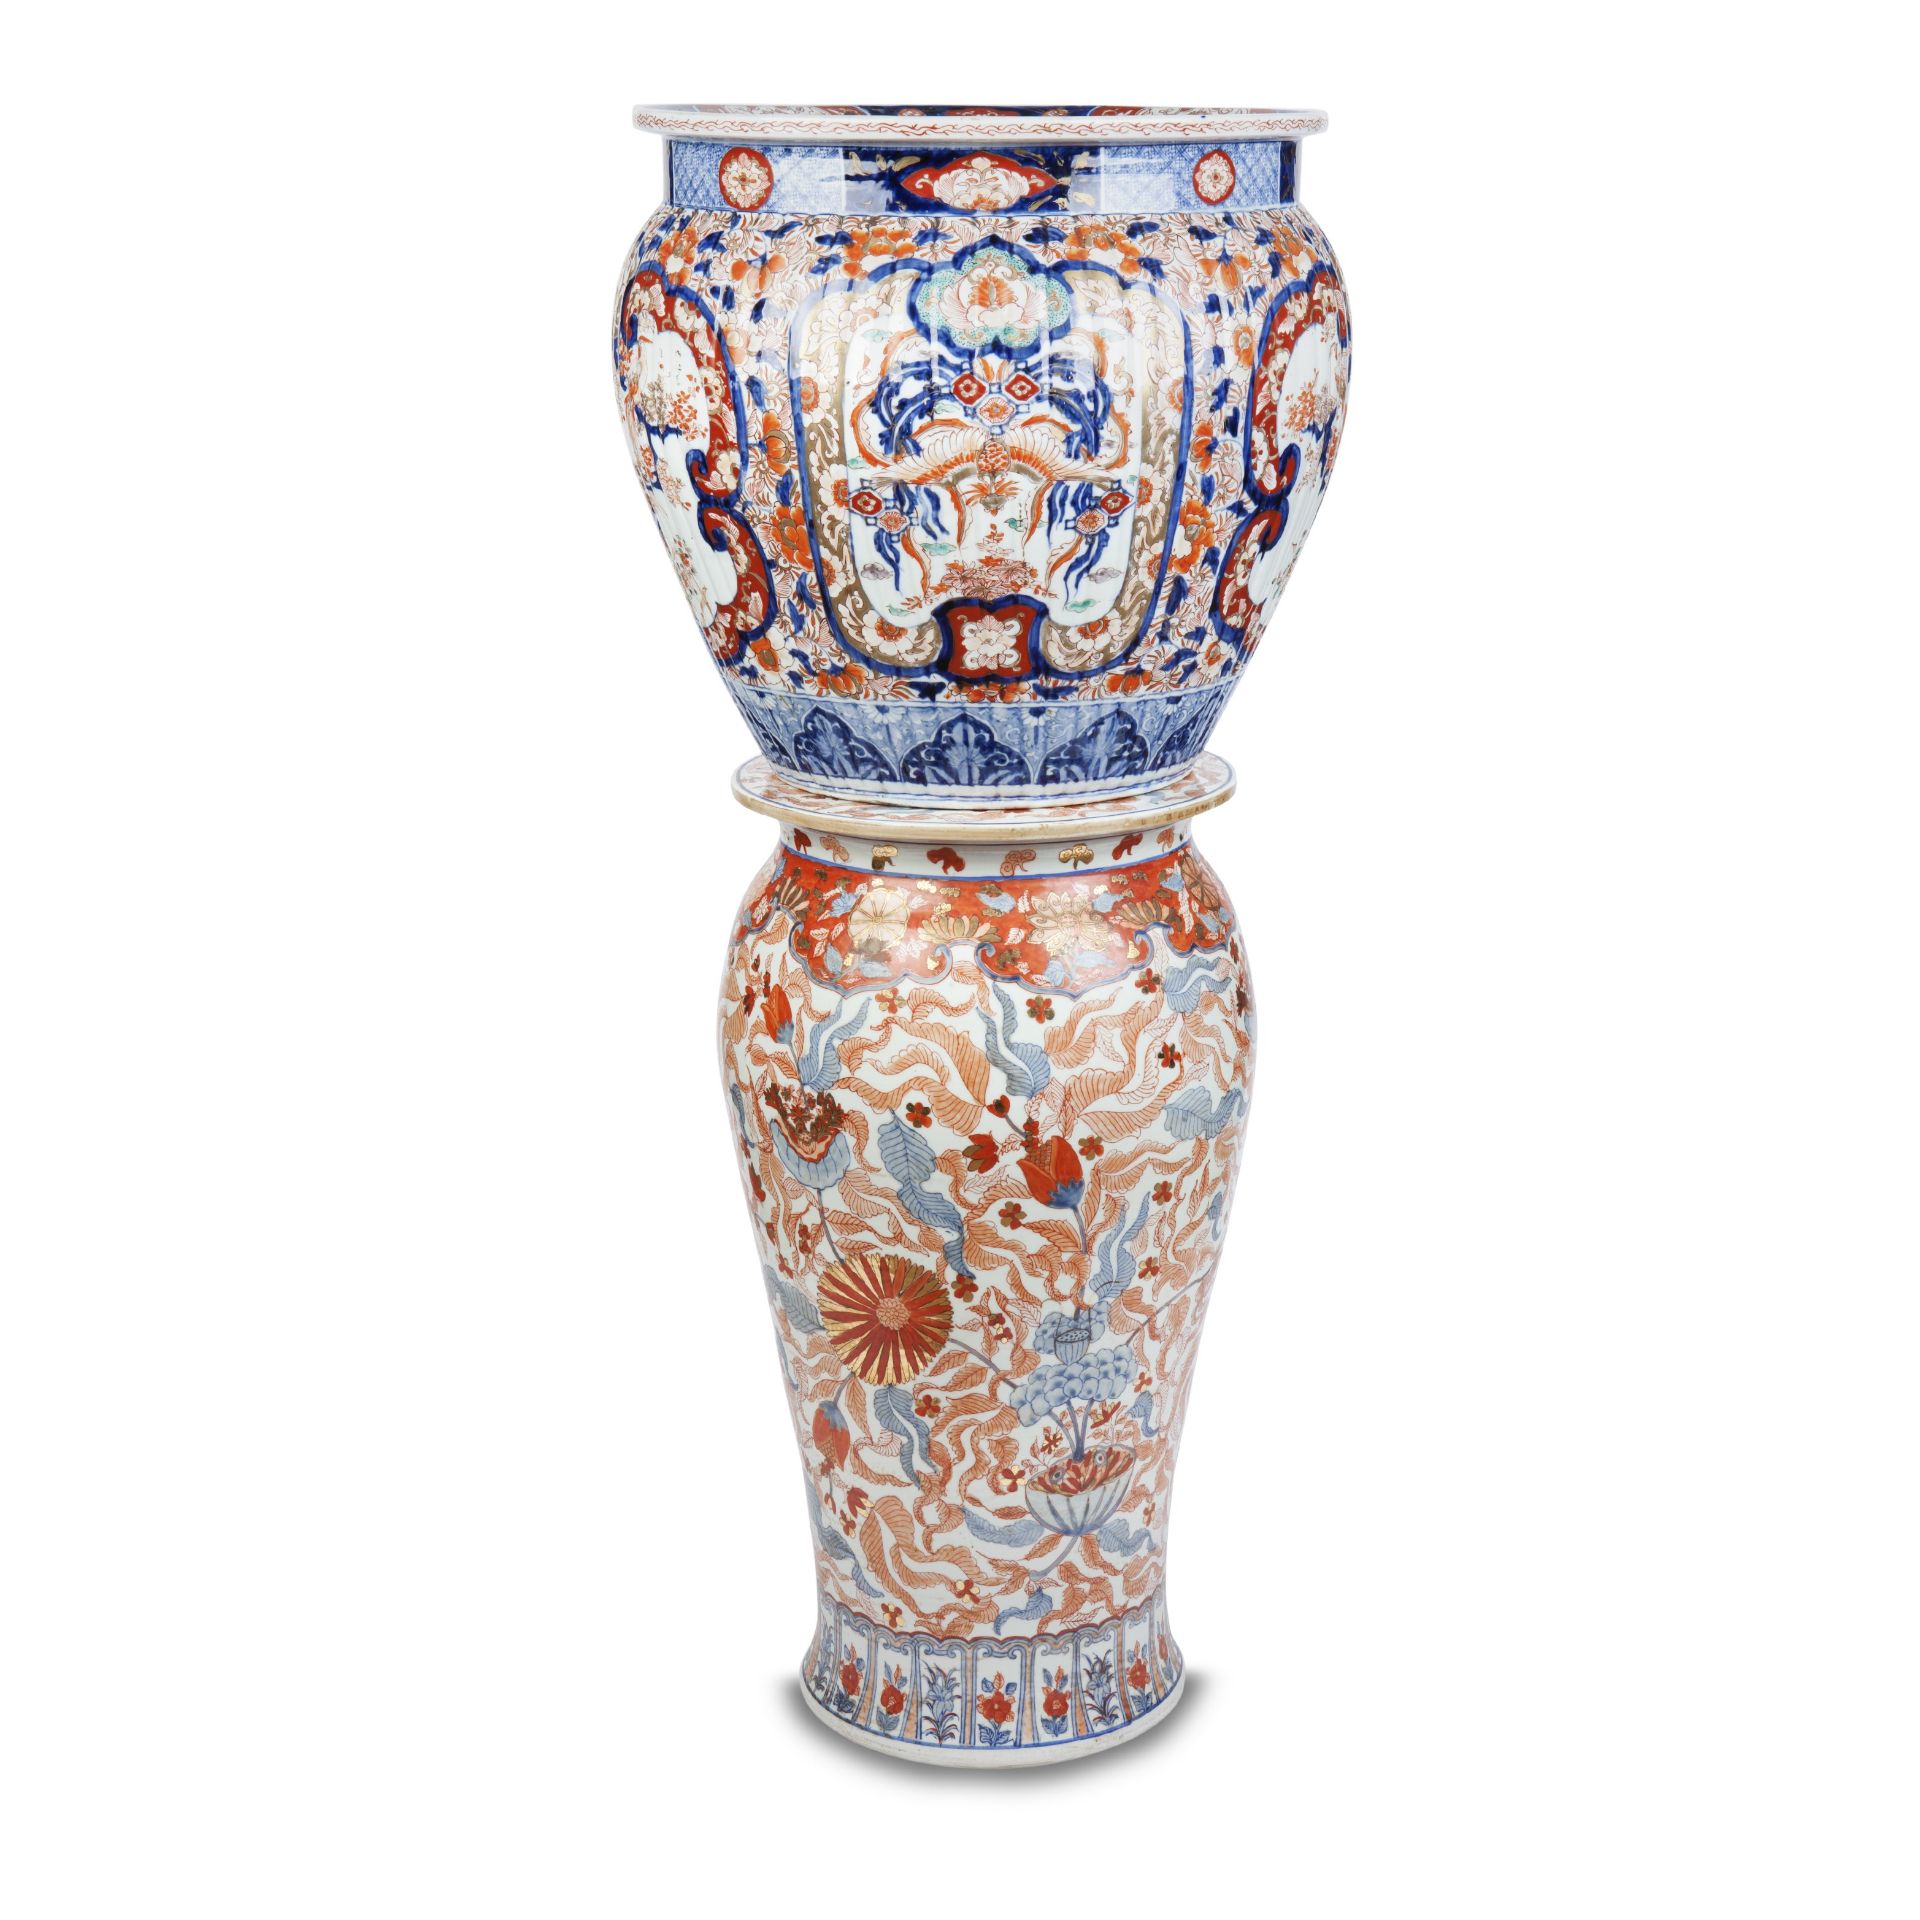 A LARGE JAPANESE IMARI JARDINIERE AND A PEDESTAL STAND Late 19th / early 20th century (2)